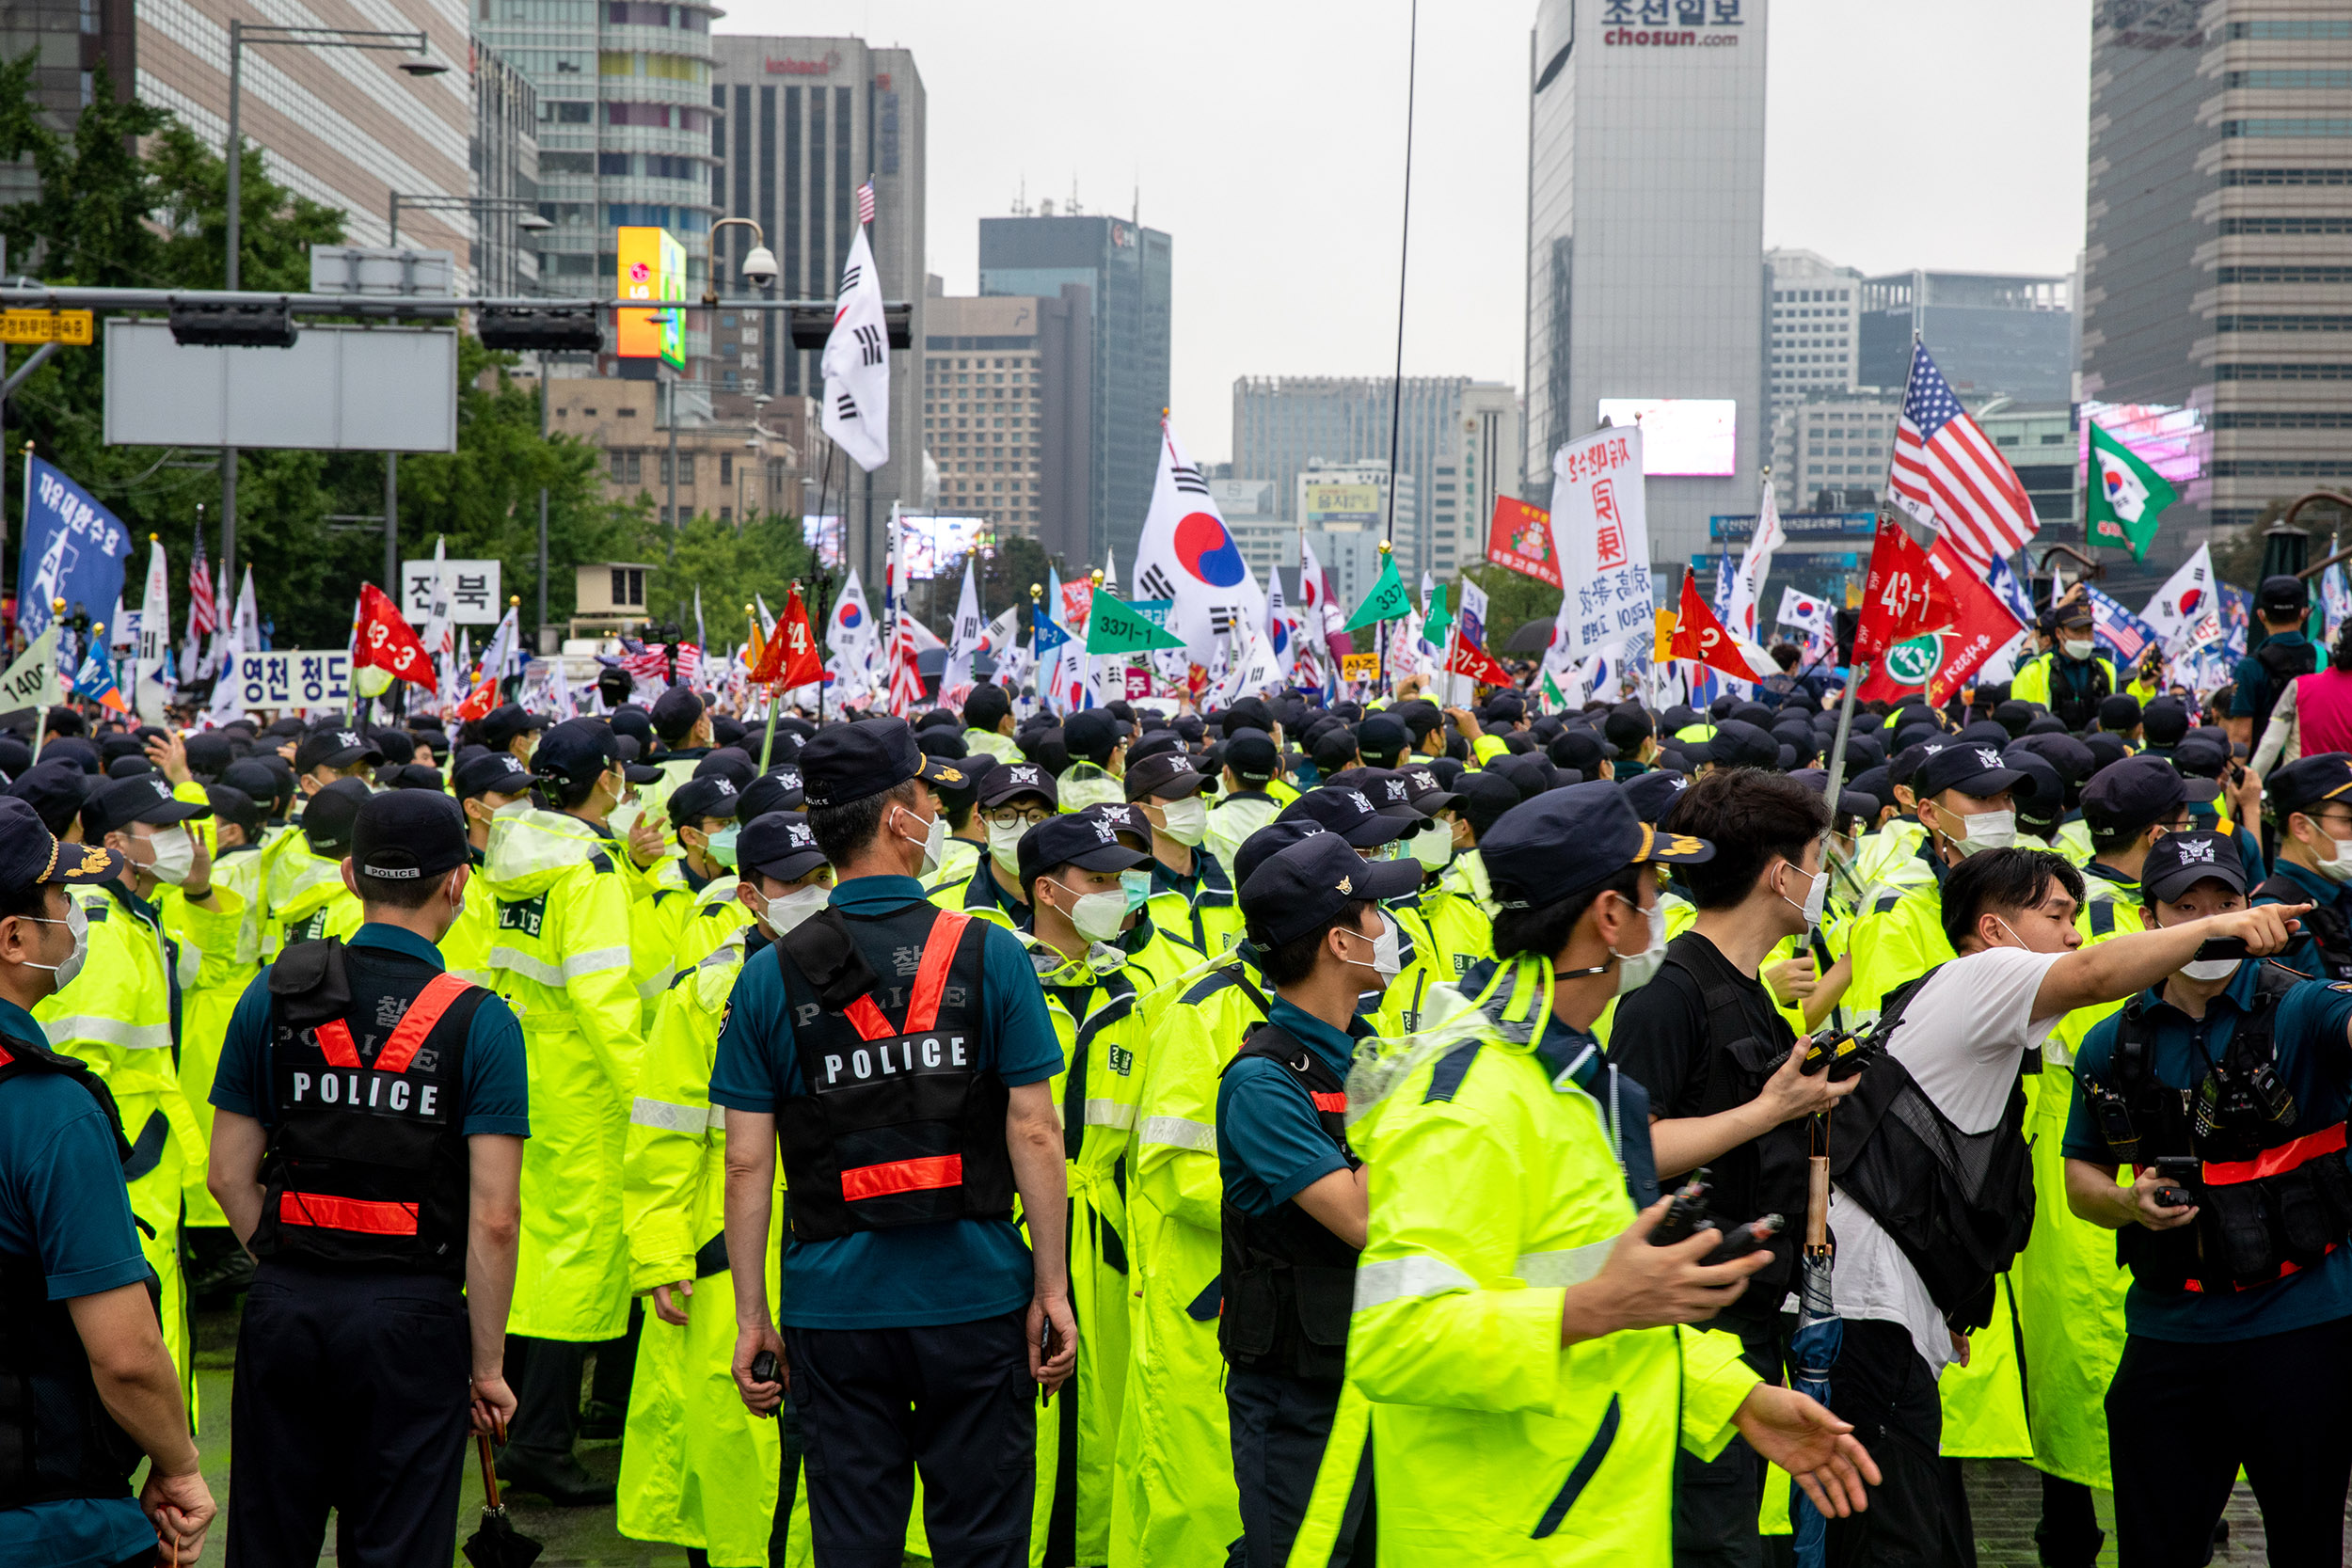 Police prevent protesters from marching to the Presidential palace (Cheong Wa Dae) during a rally against the government on August 15, in Seoul, South Korea. 